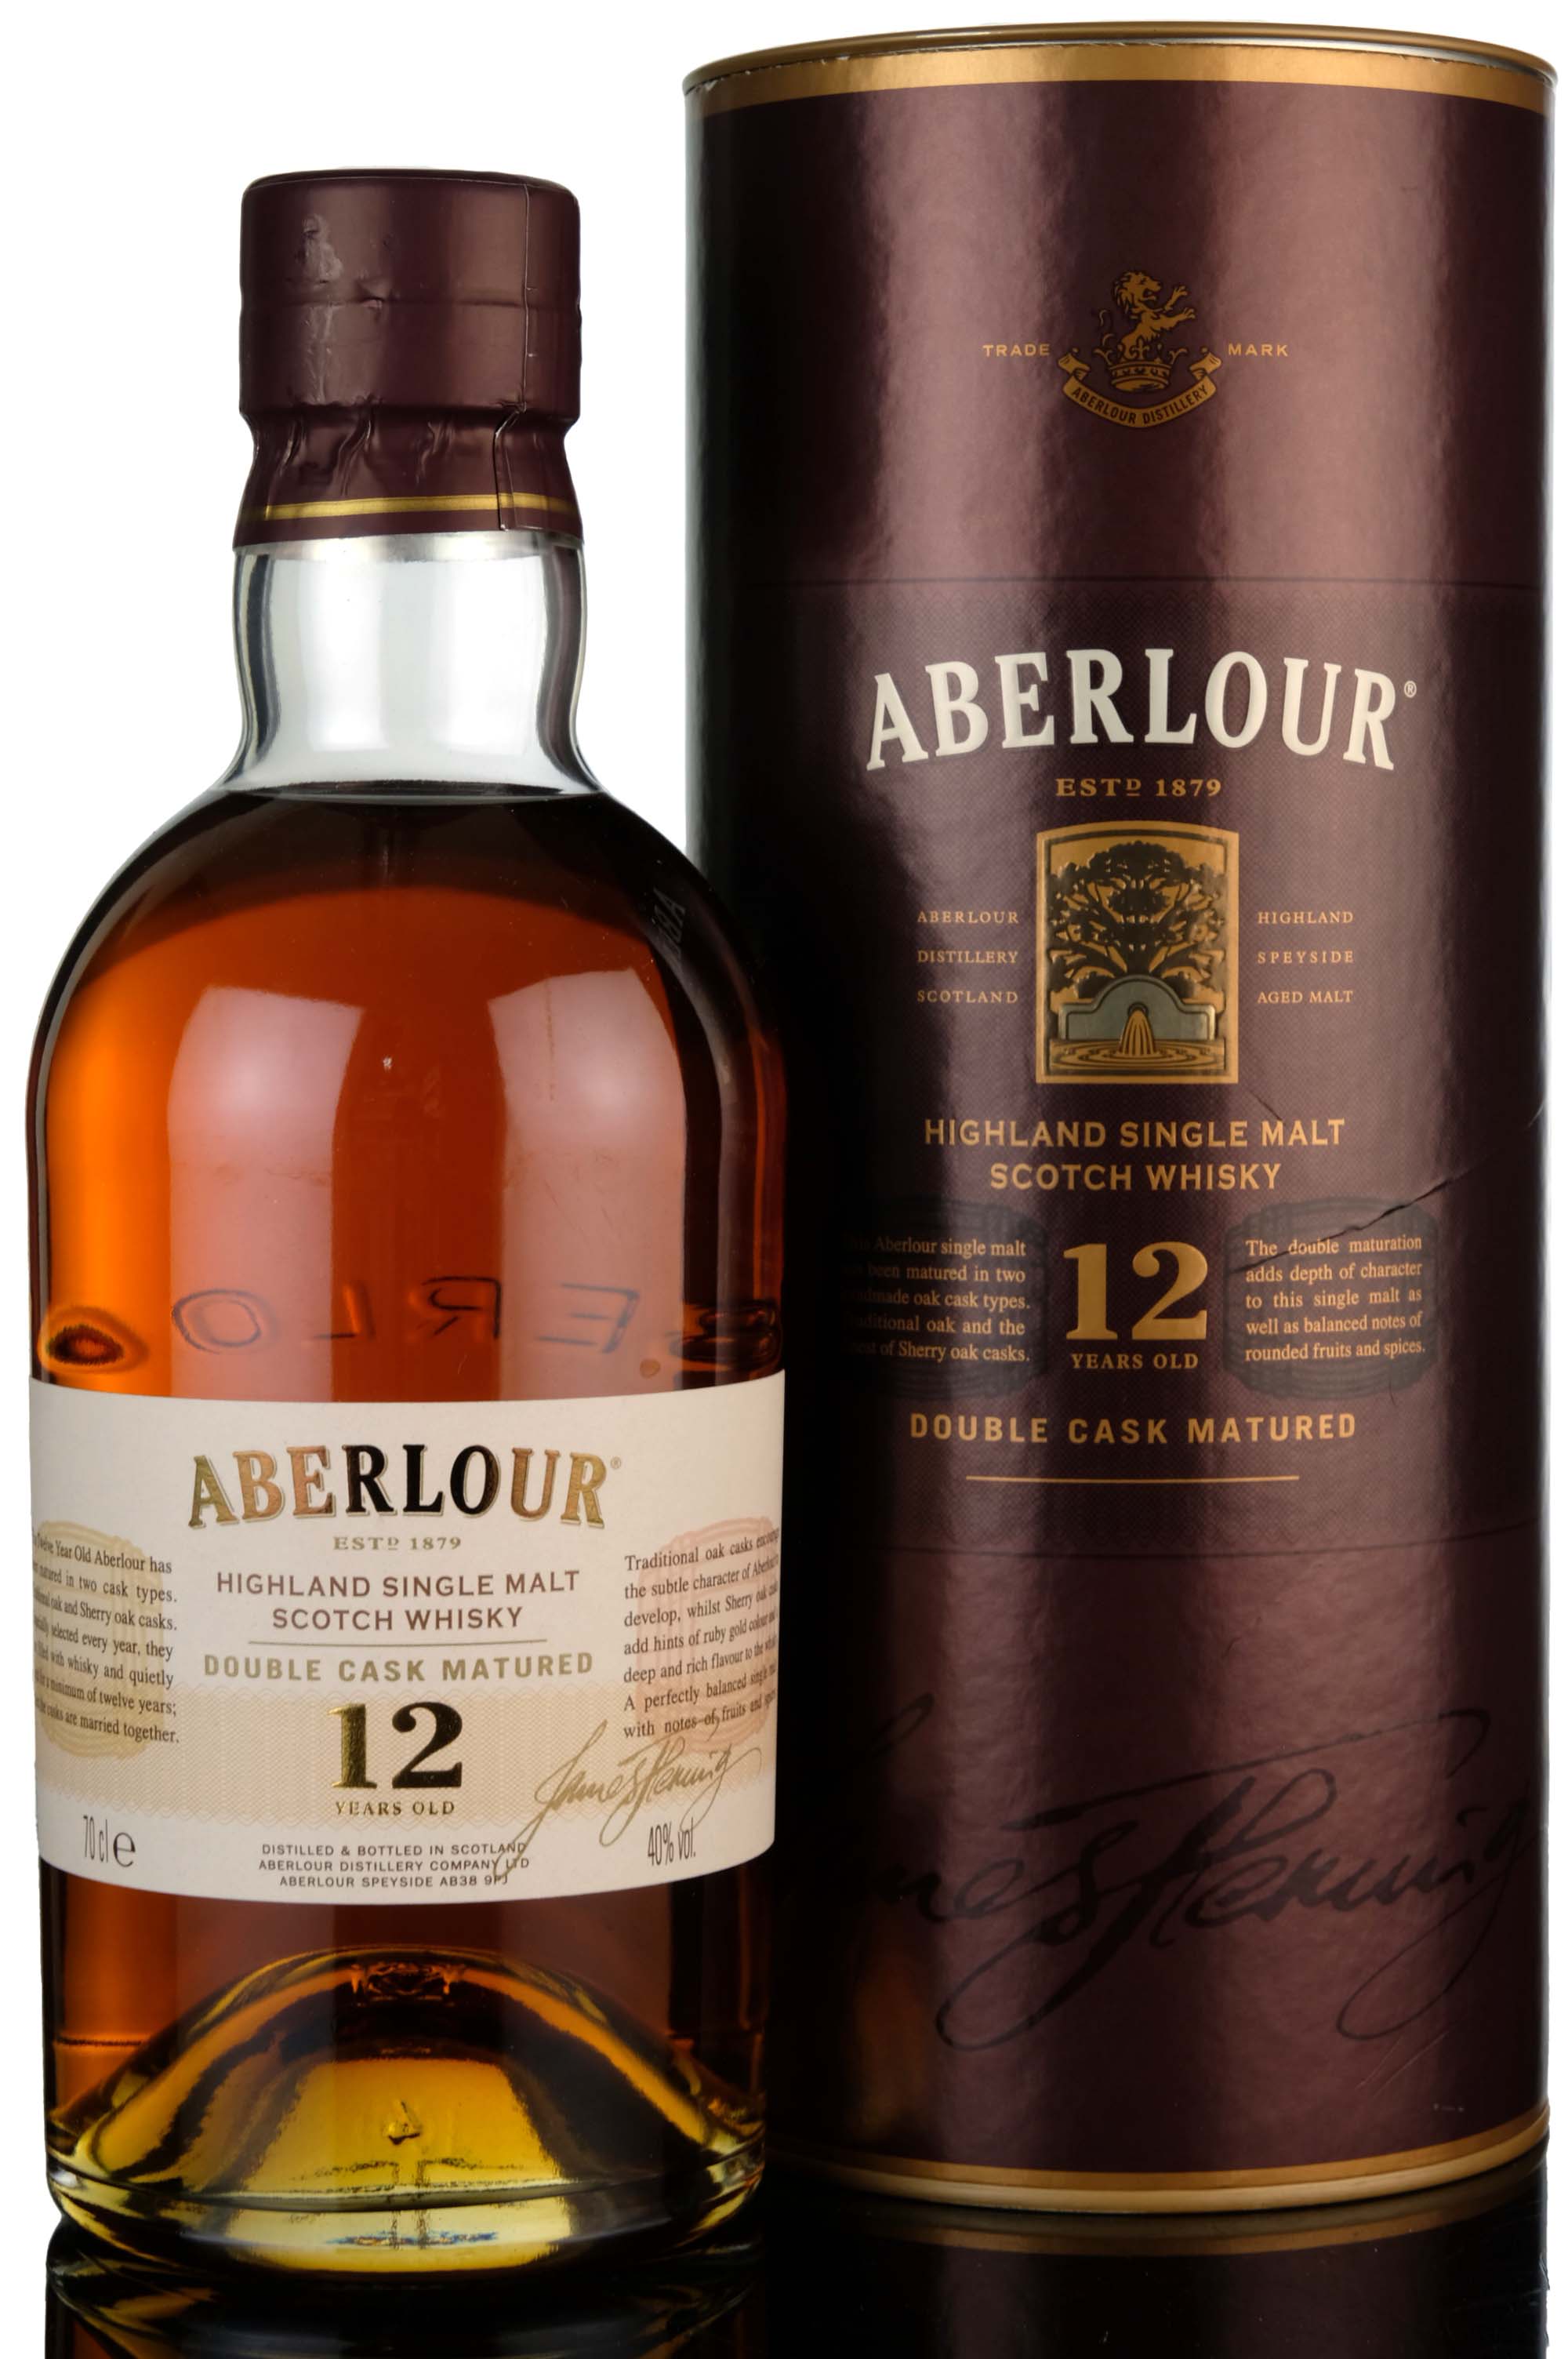 Aberlour 12 Year Old - Double Cask Matured